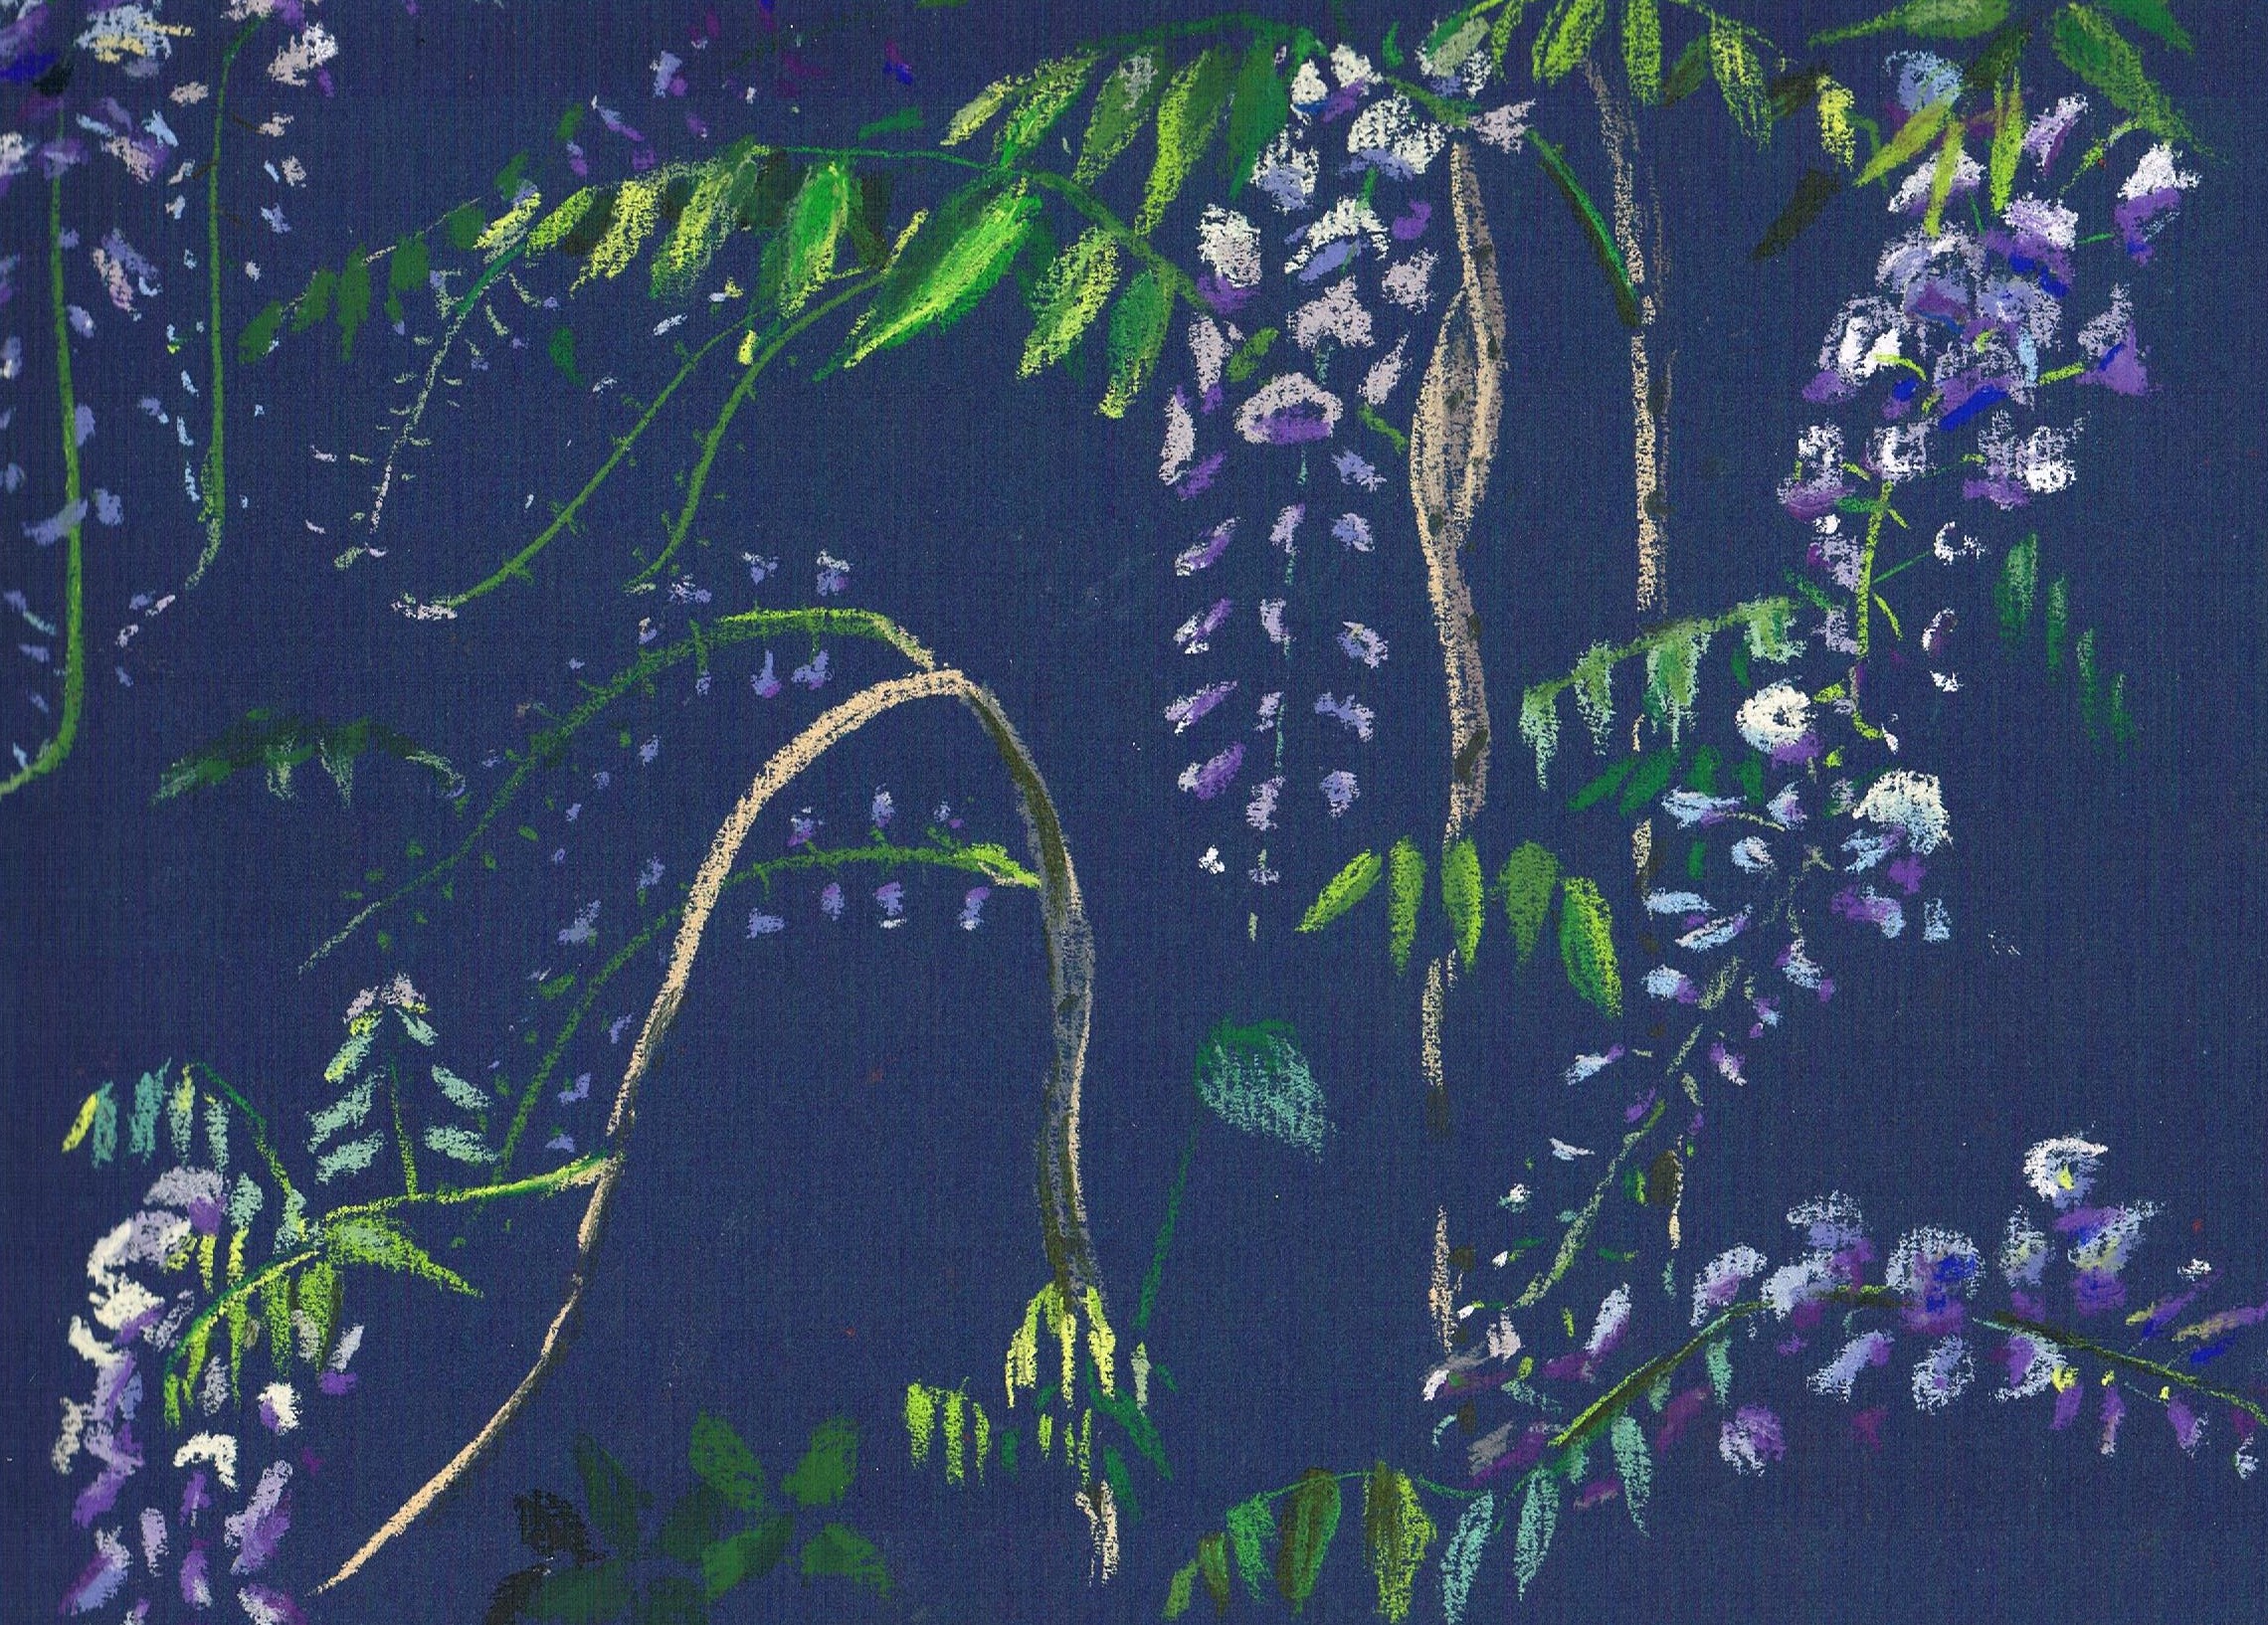 wisteria 12 may 3 19